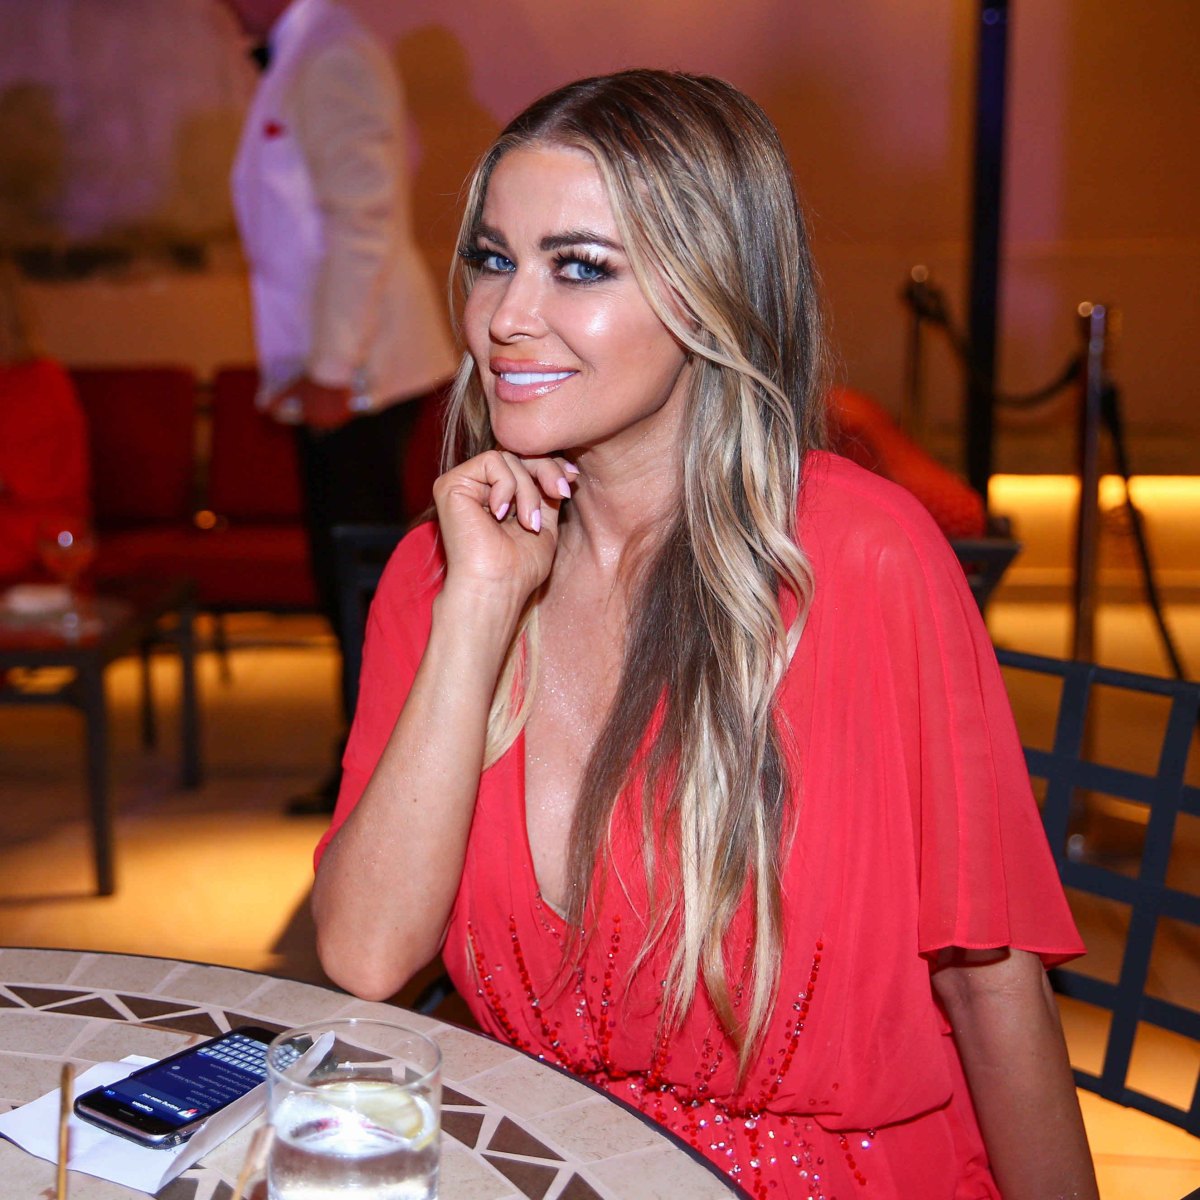 Carmen Electra's Transformation: See Photos Then and Now